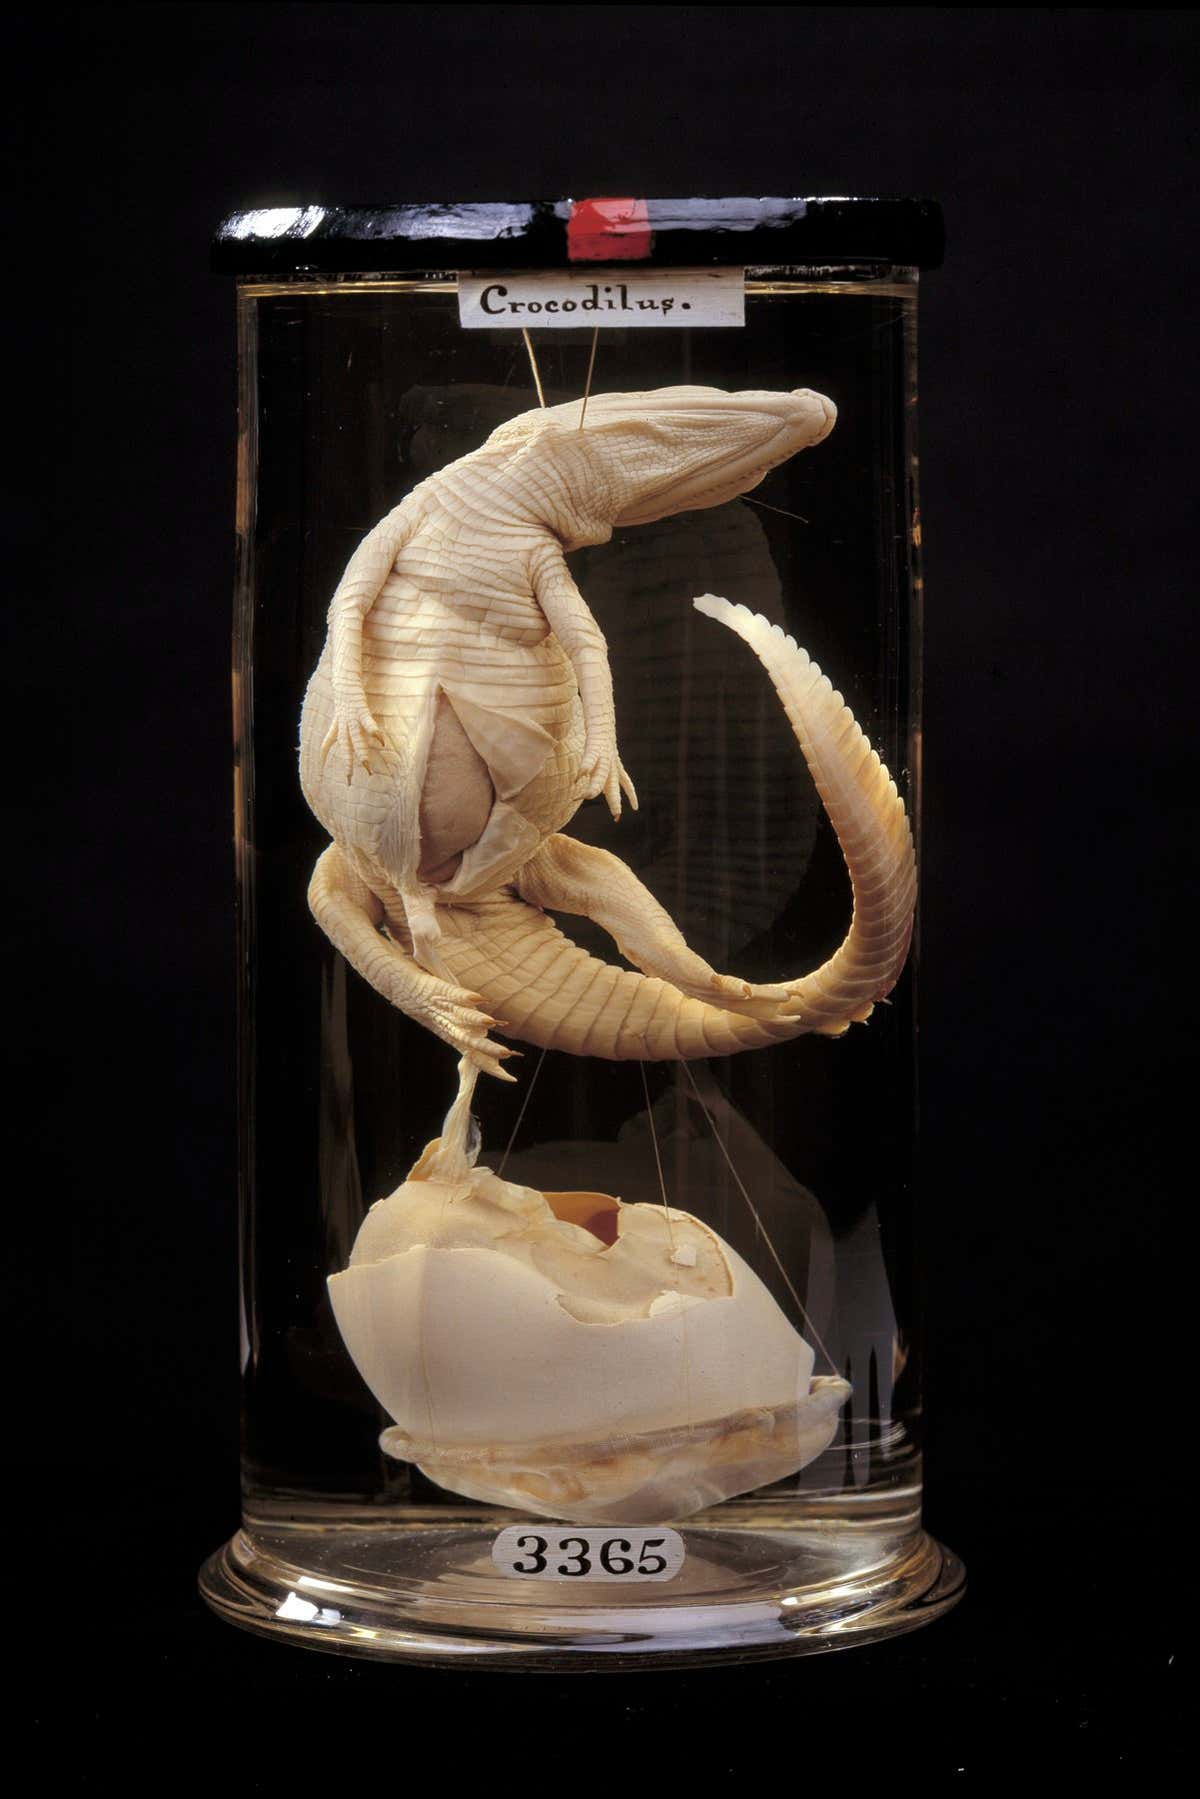 A crocodile emerging from its egg, prepared by John Hunter between 1760 and 1793 One of over 2,000 specimens on display in the new Hunterian Museum